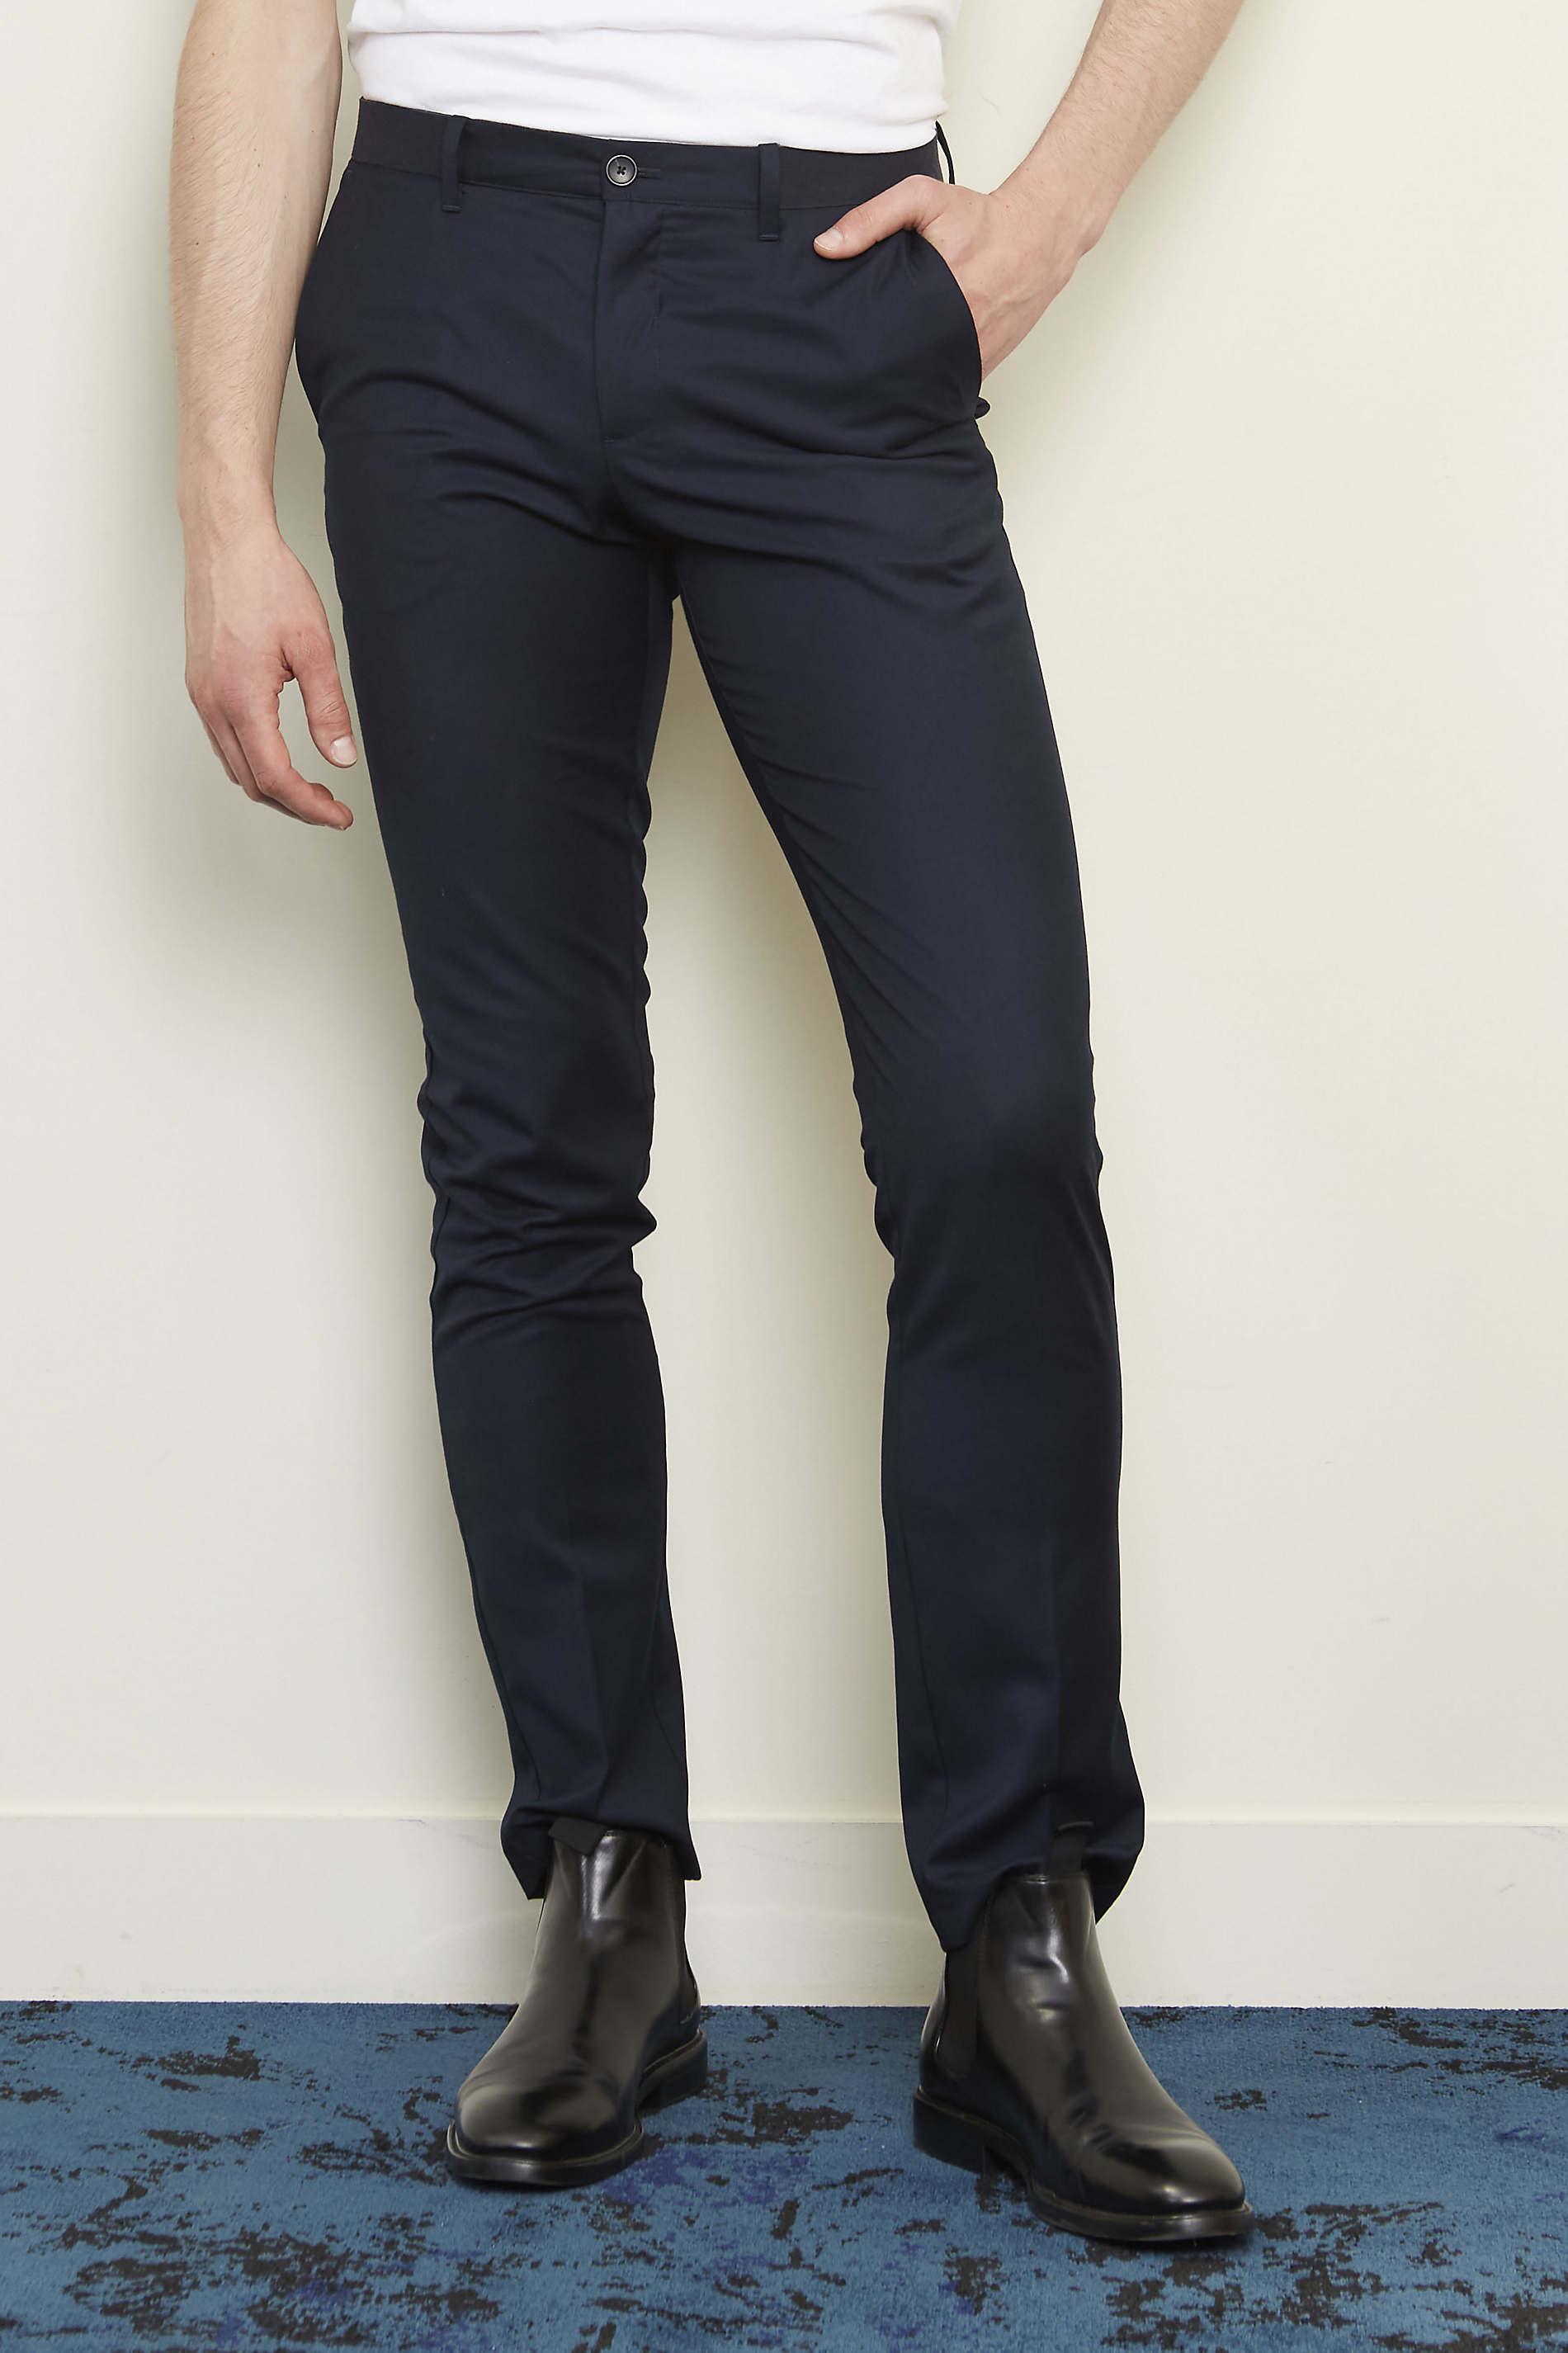 MEN'S ELASTICATED WAIST SUIT TROUSERS<br/><p>These smart and timeless trousers are an iconic piece of men’s wardrobe. With their mid-season soft fabric and elasticated waistband, they fit all body shapes. They can be worn as a part of a three-piece suit for formal events or with a T-shirt for a casual style.</p> NEOBLU GABIN MEN